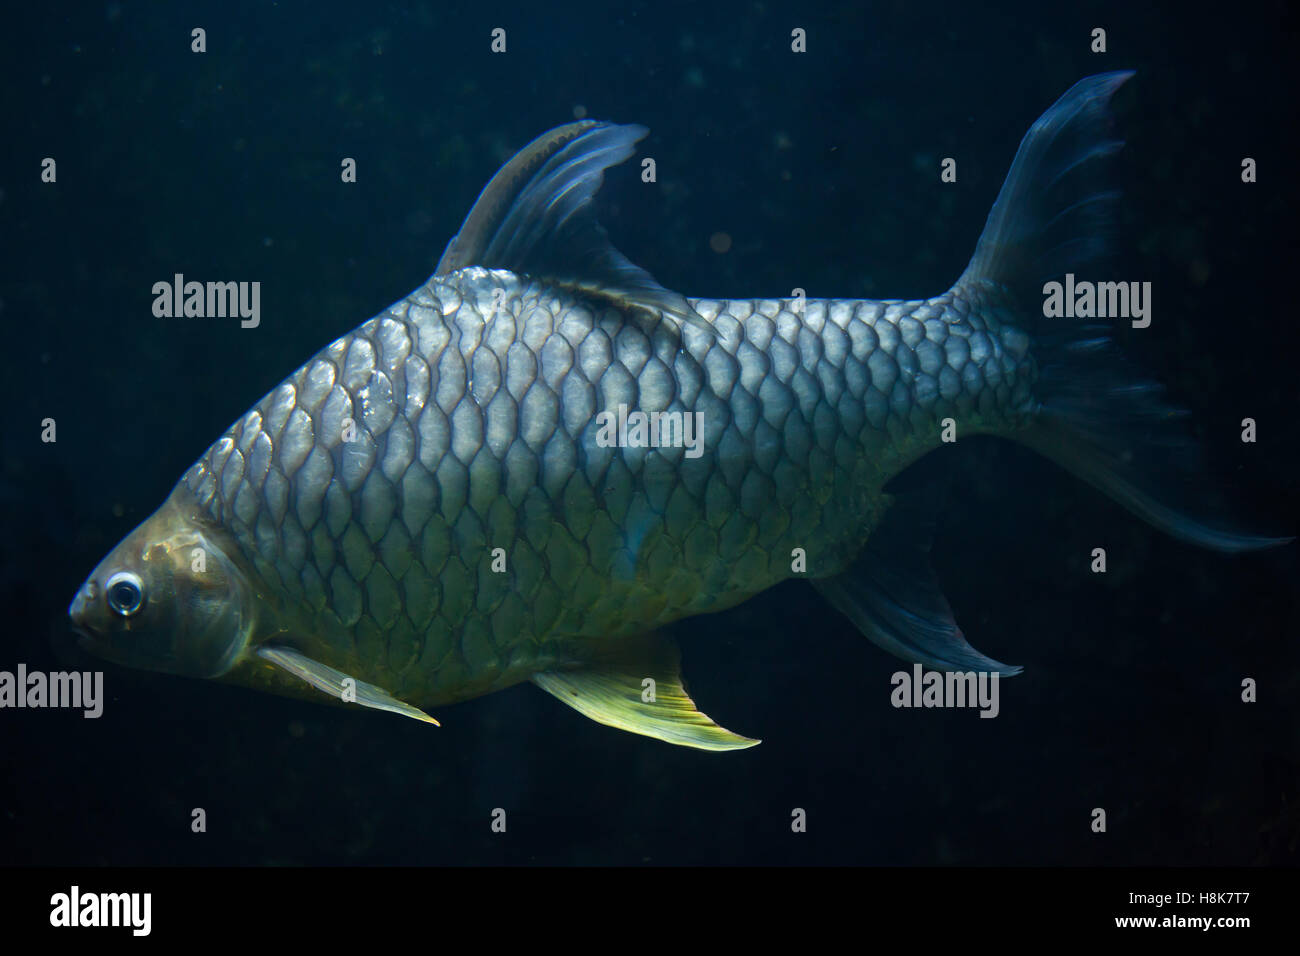 Java barb (Barbonymus gonionotus), also known as the silver barb. Stock Photo